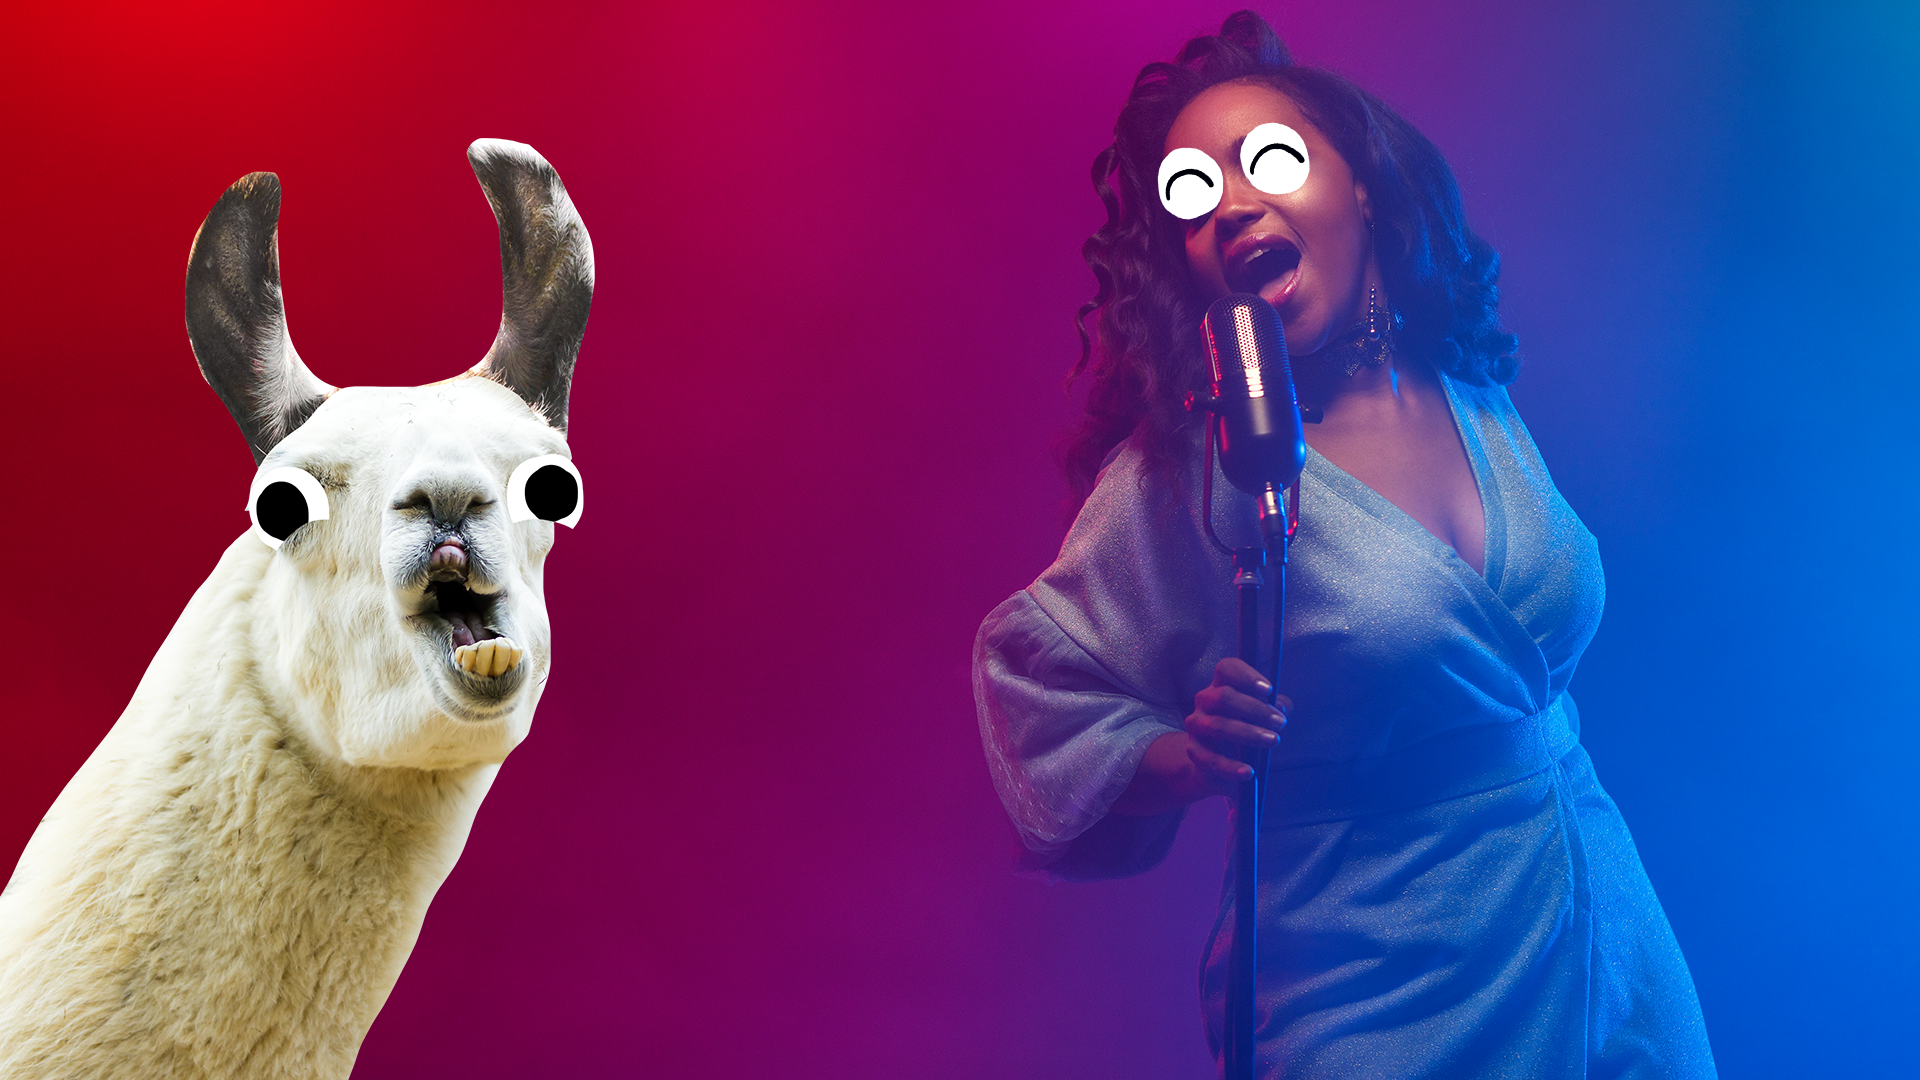 Singer on purple background with derpy llama 